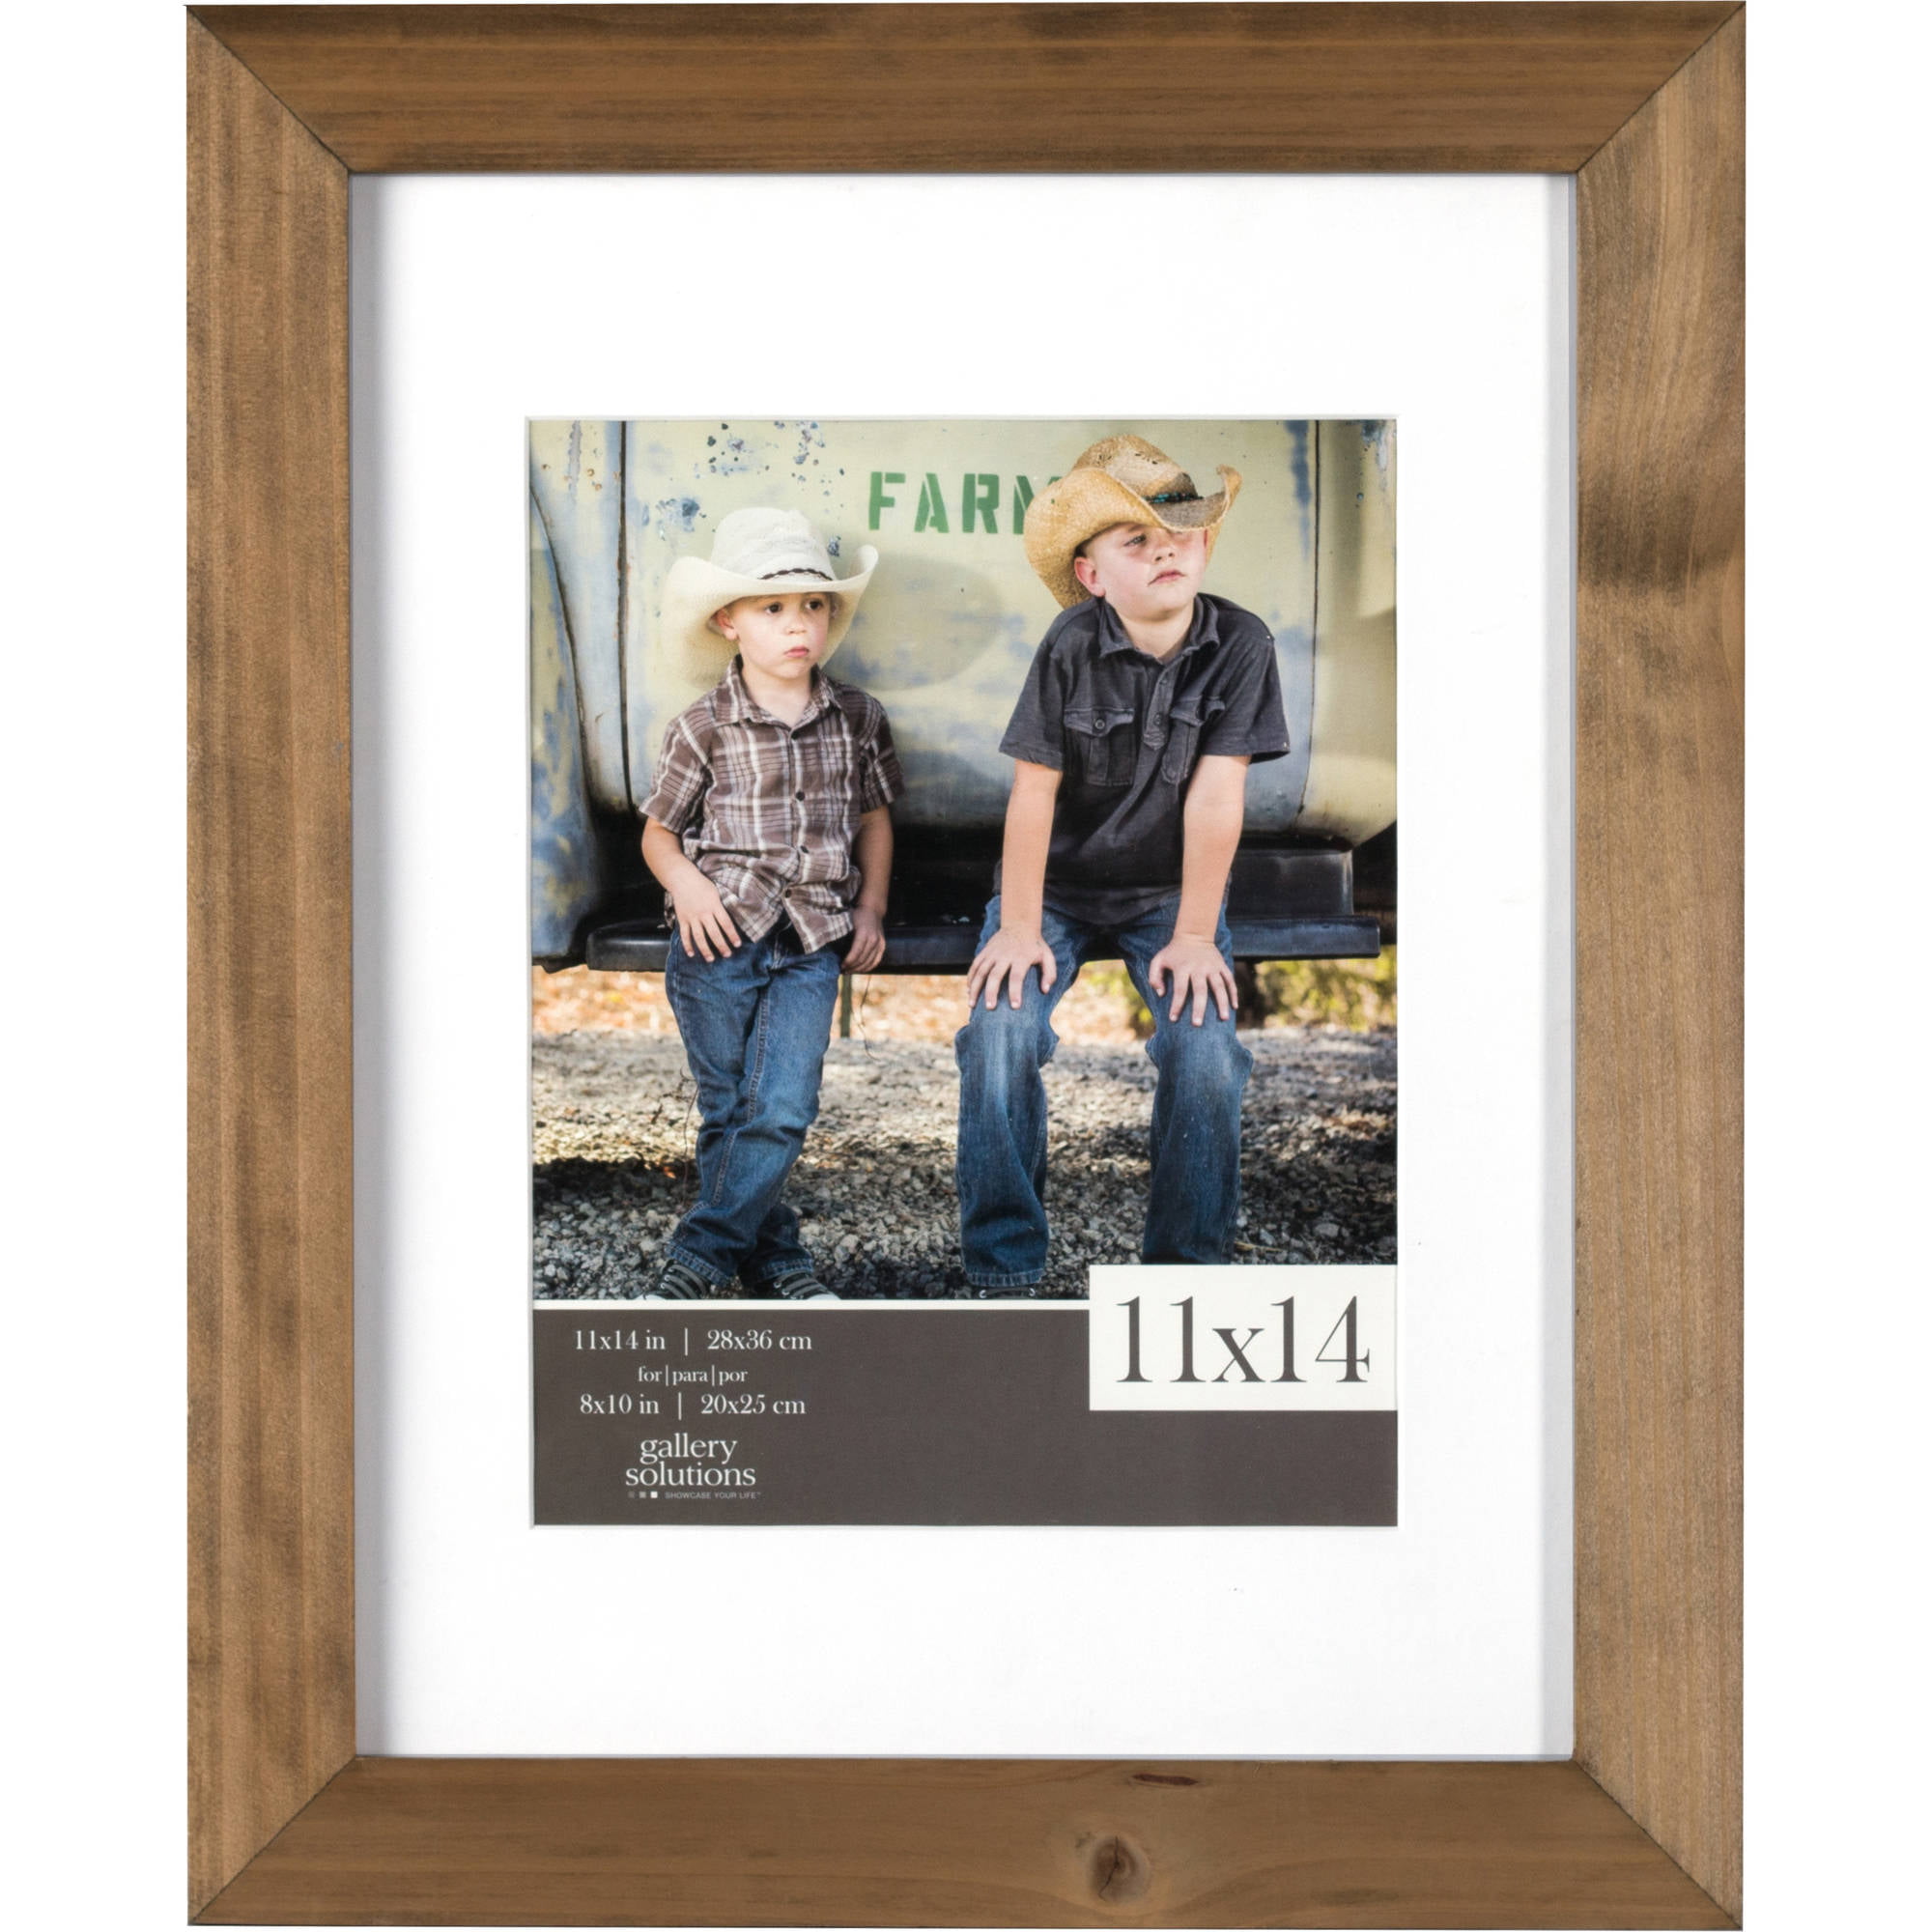 Black Made to Display 8x10 with Mat Malden 11x14 Distressed Wood Matted Picture Frame Without Mat